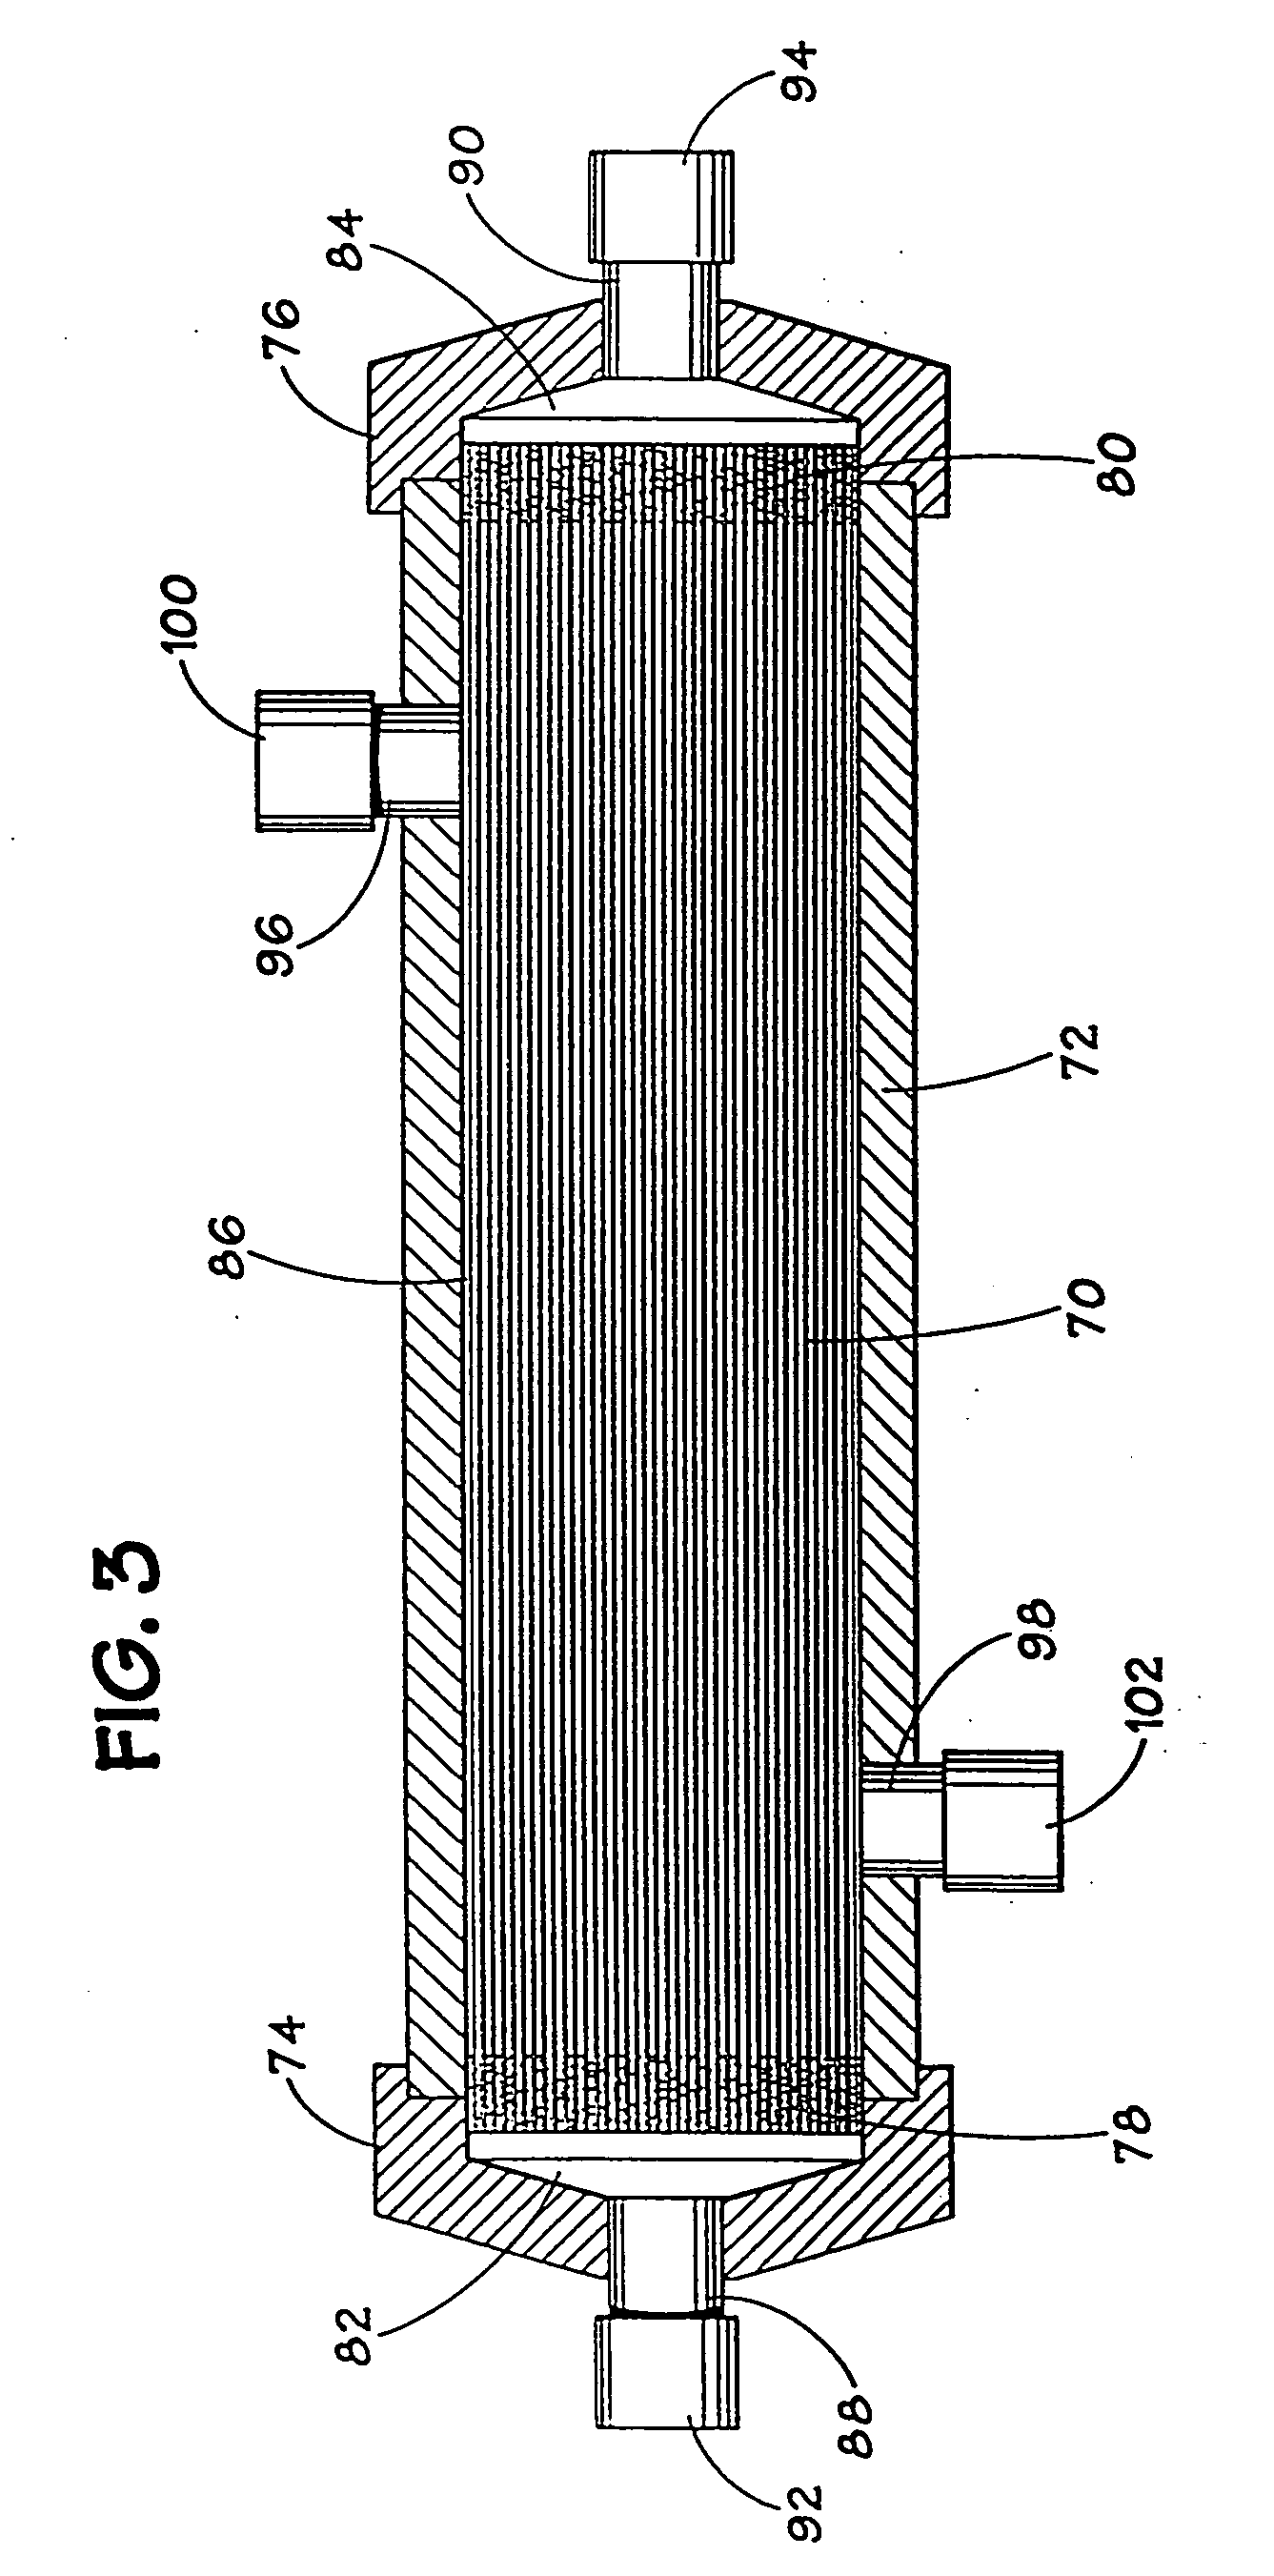 Apparatus for blood oxygenation